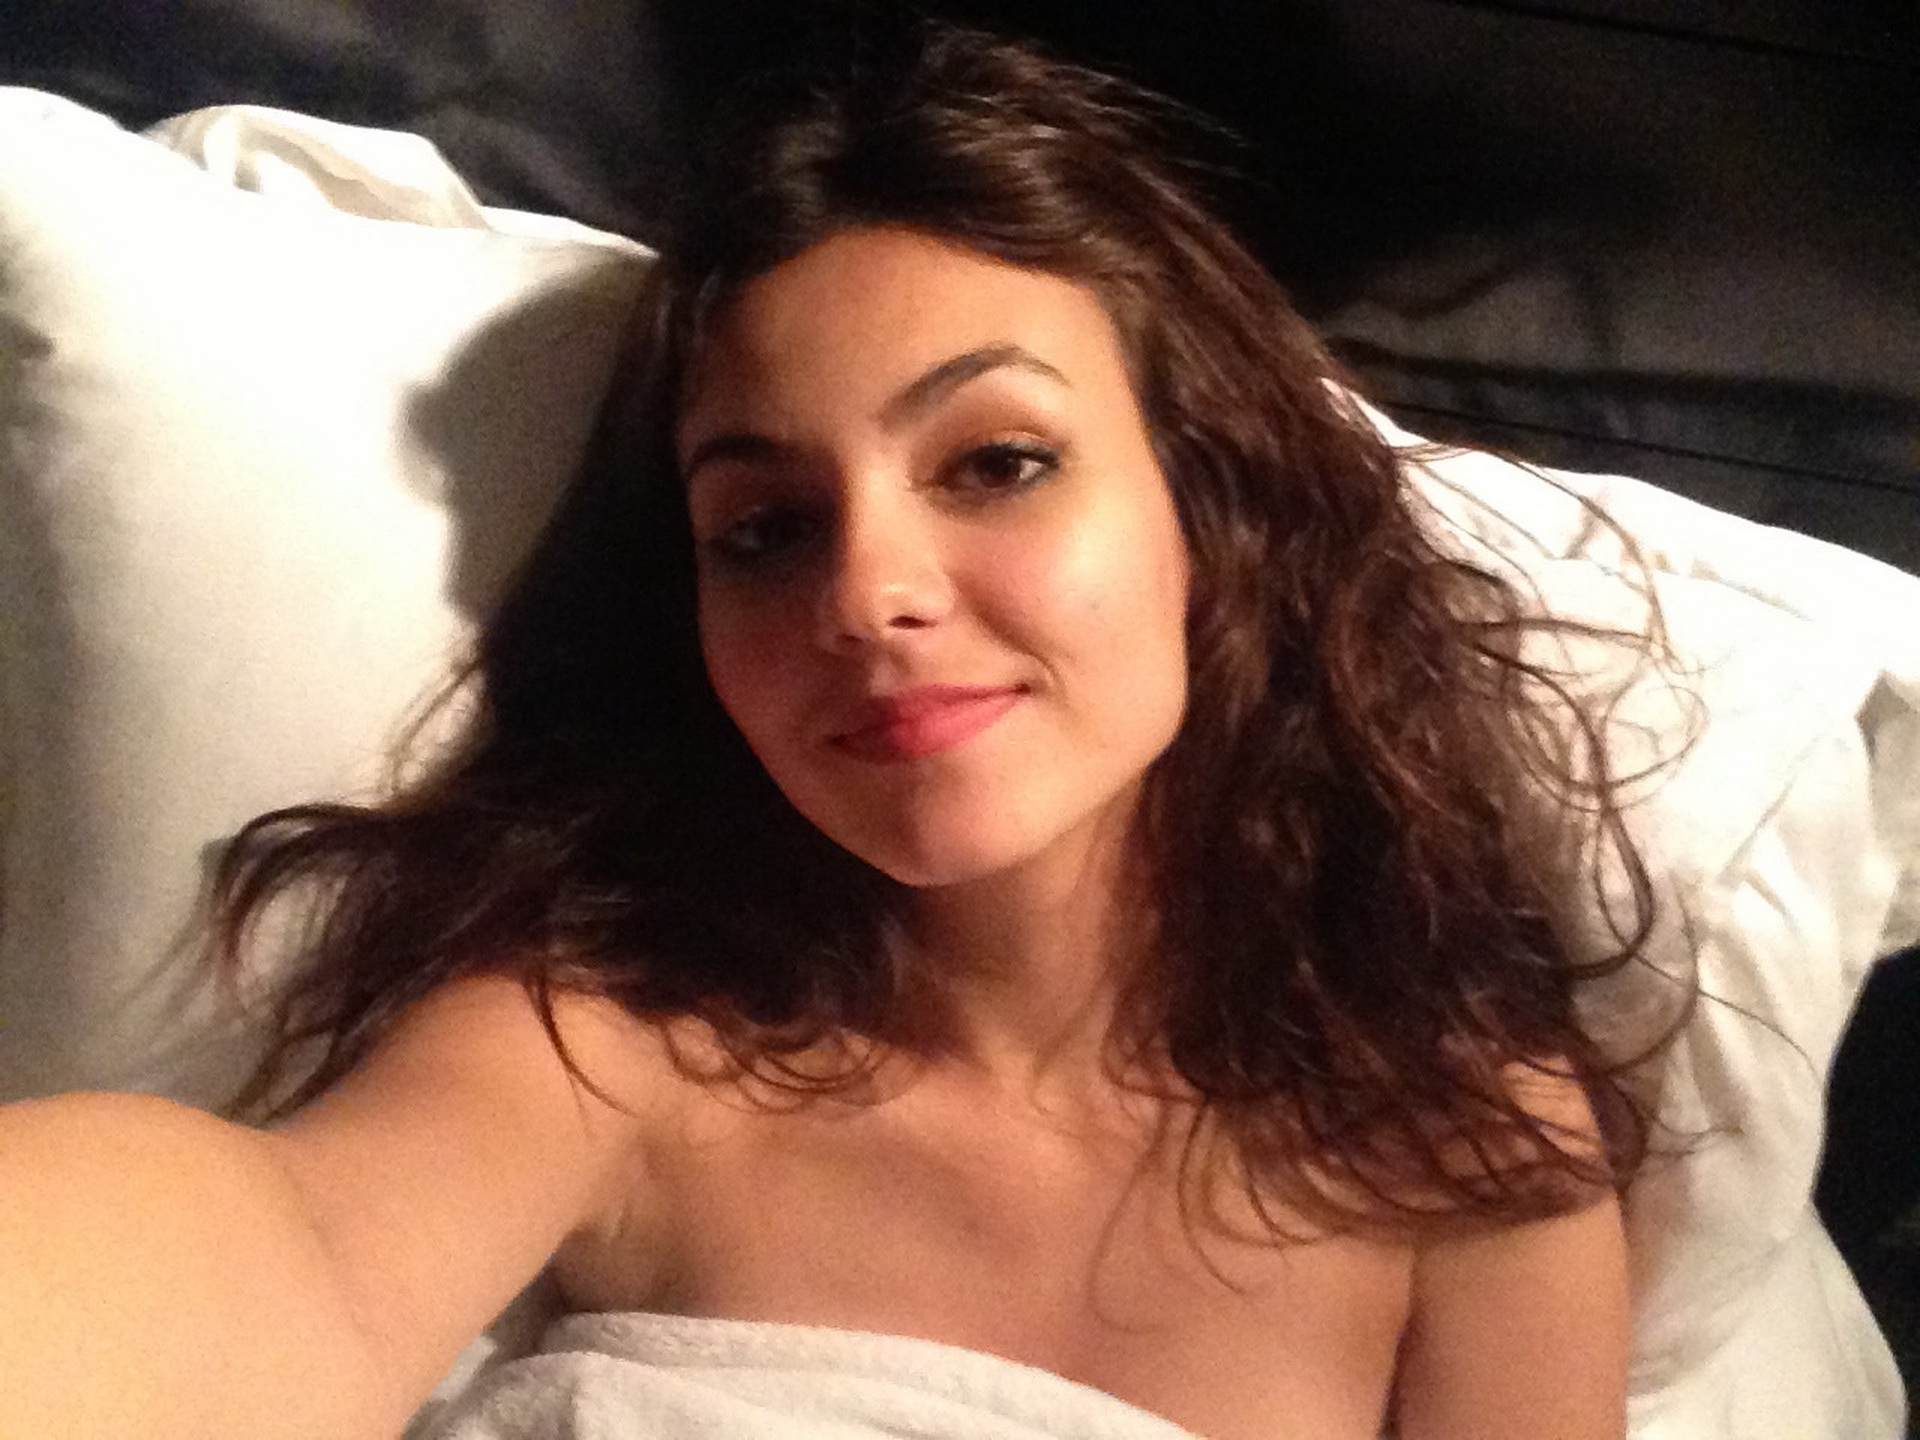 Victoria_Justice_leaked_private_nude_photo_hacked_personal_naked_pics_36x_MixQ_32.jpg